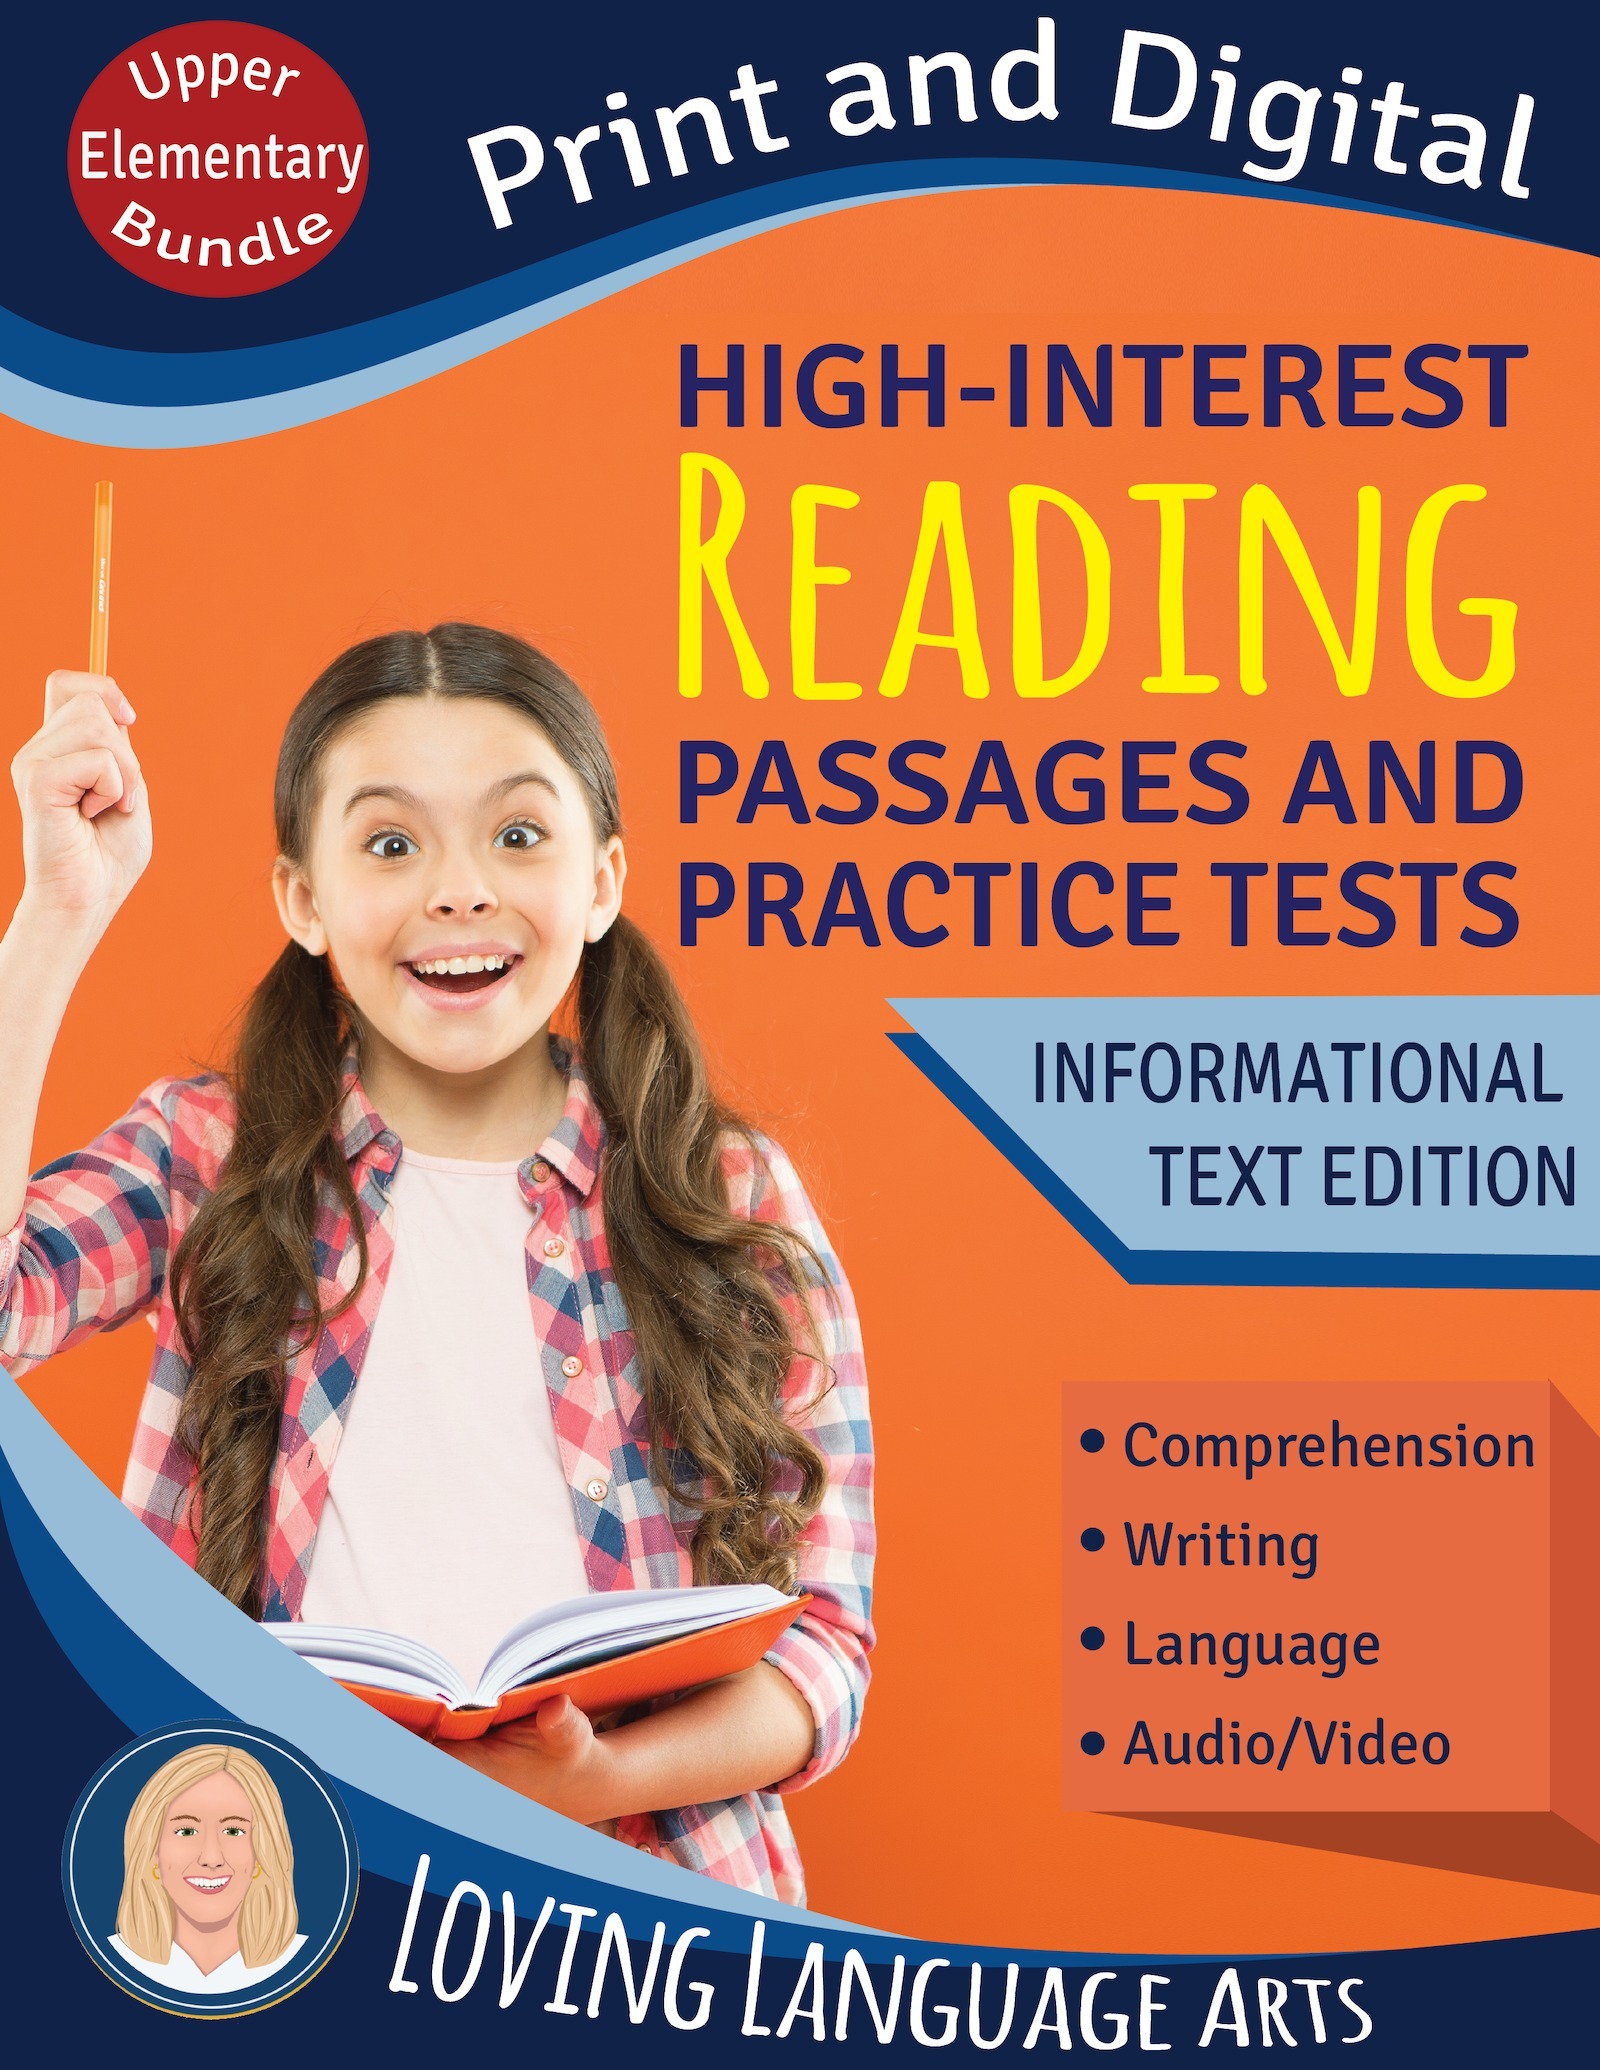 4th-5th grade language arts workbook bundle - High-interest passages and practice tests.